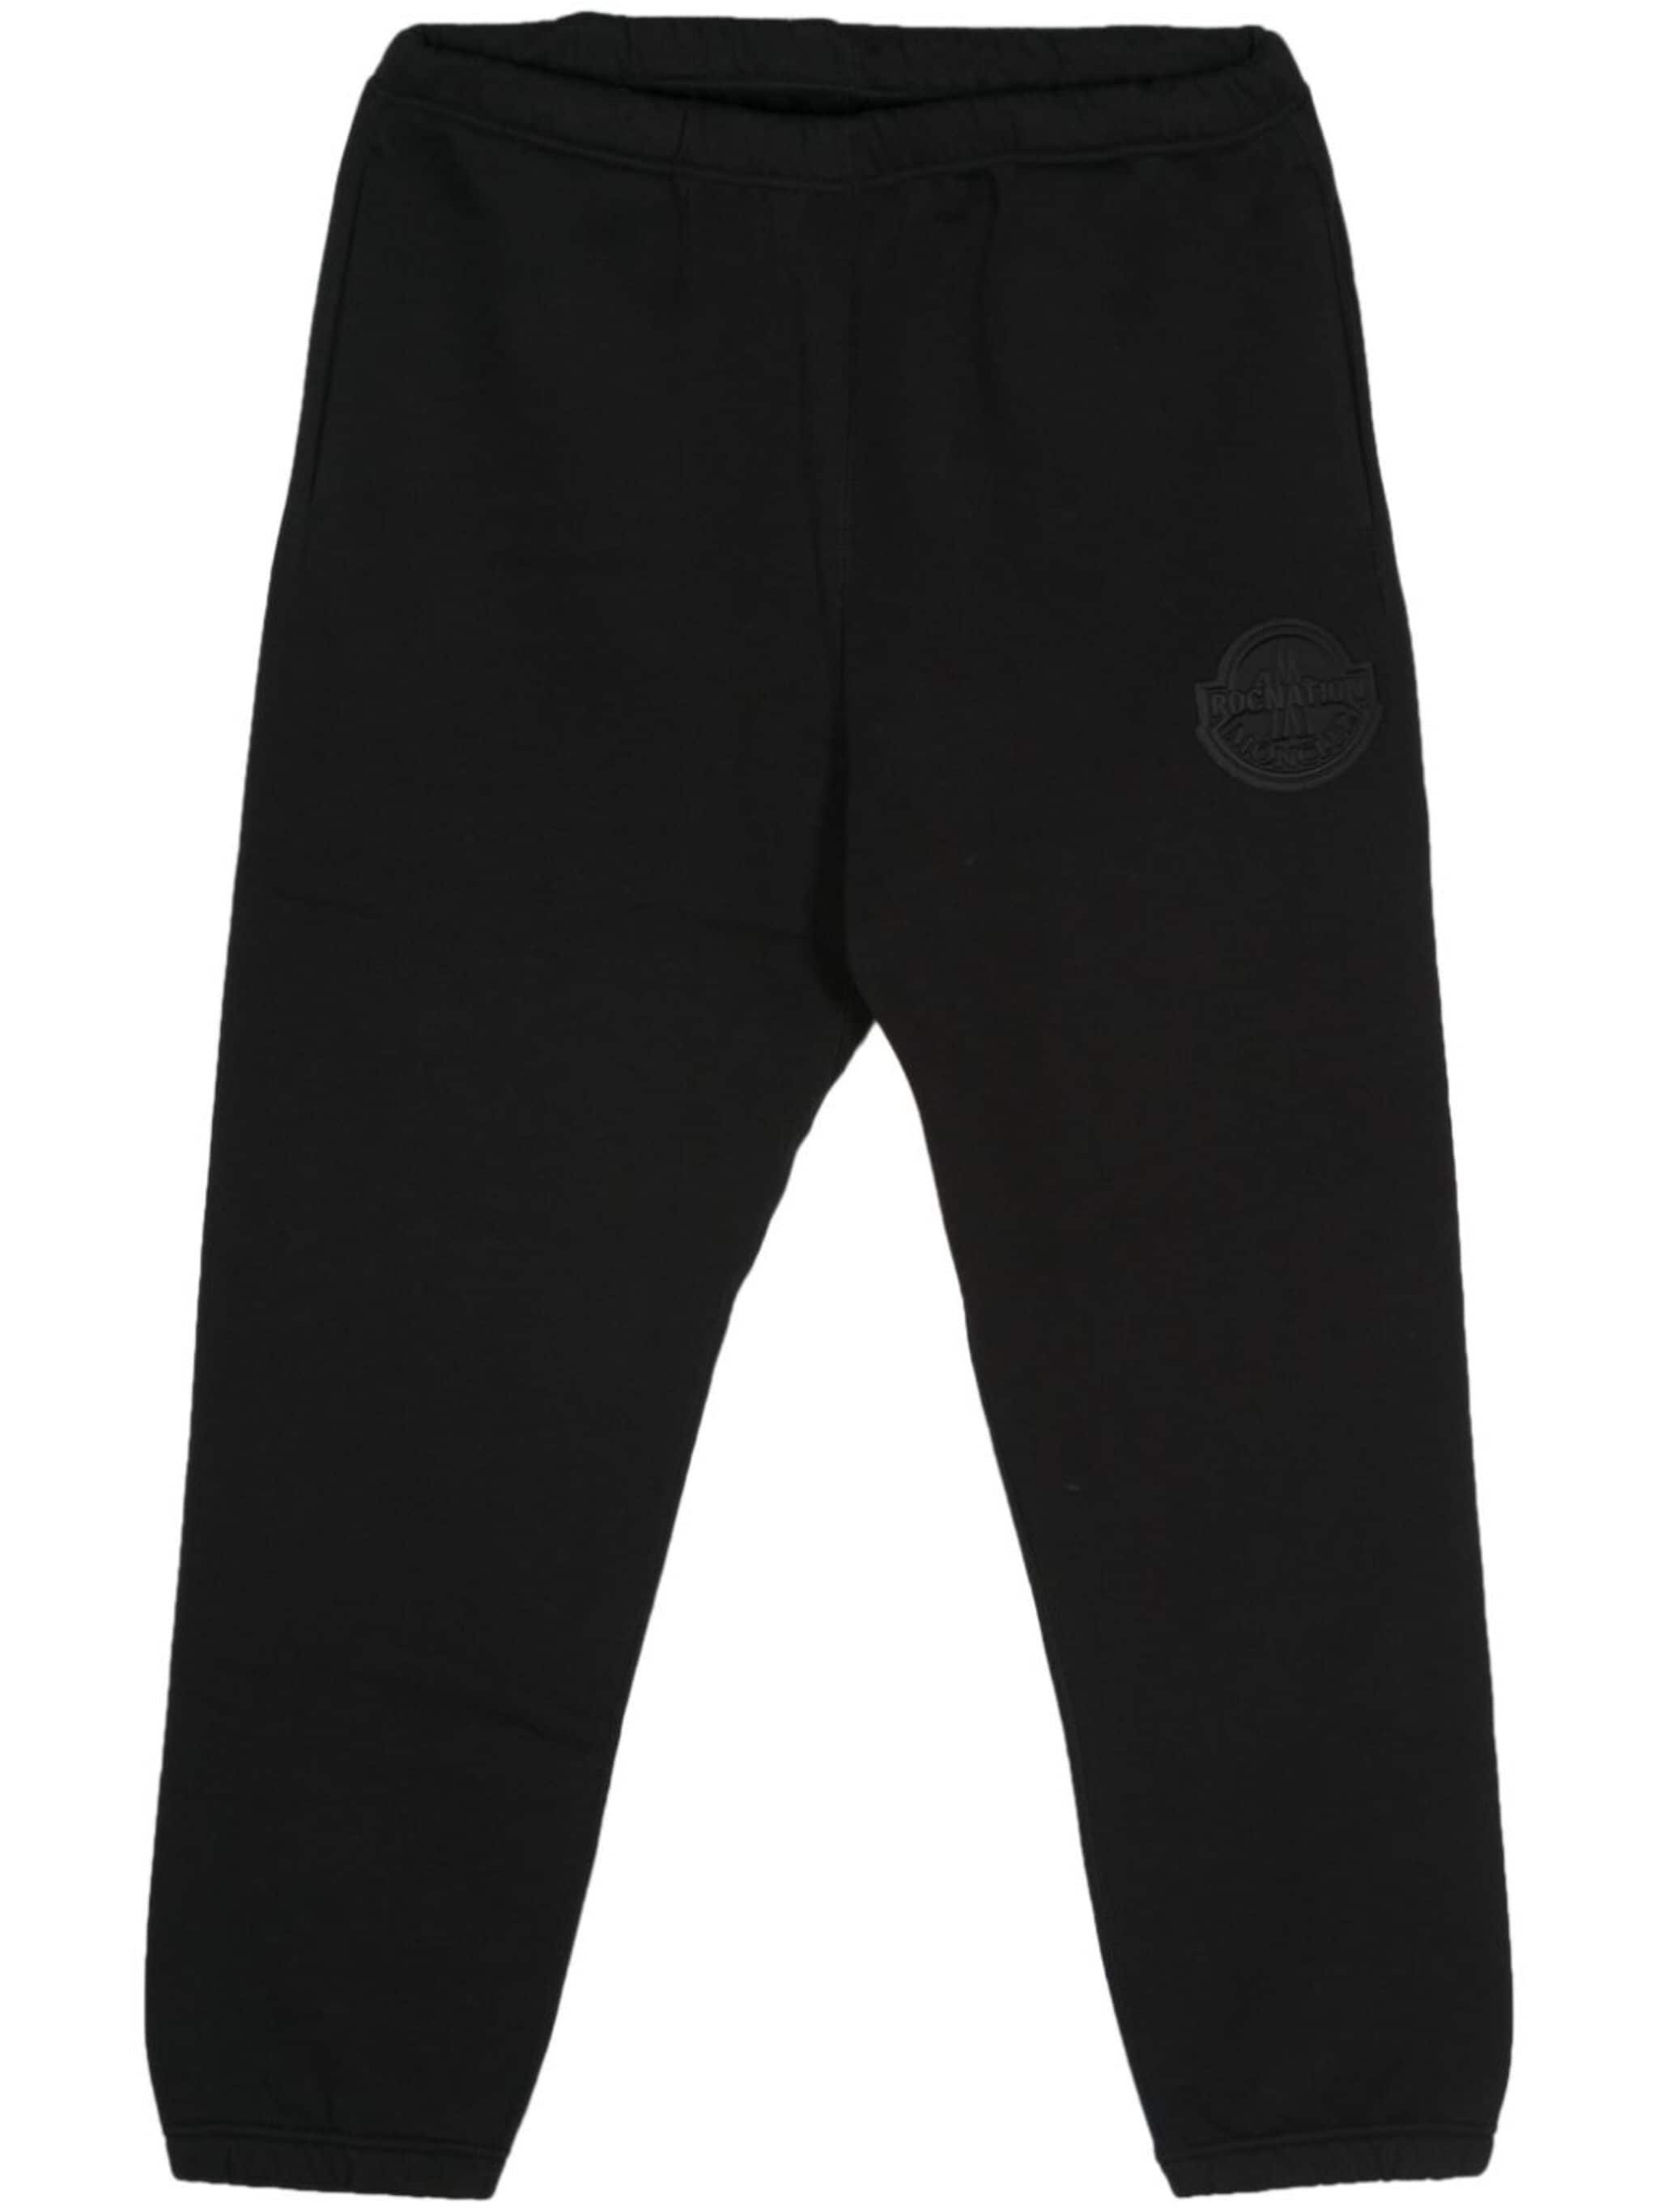 x Roc Nation by JAY Z track trousers - 1